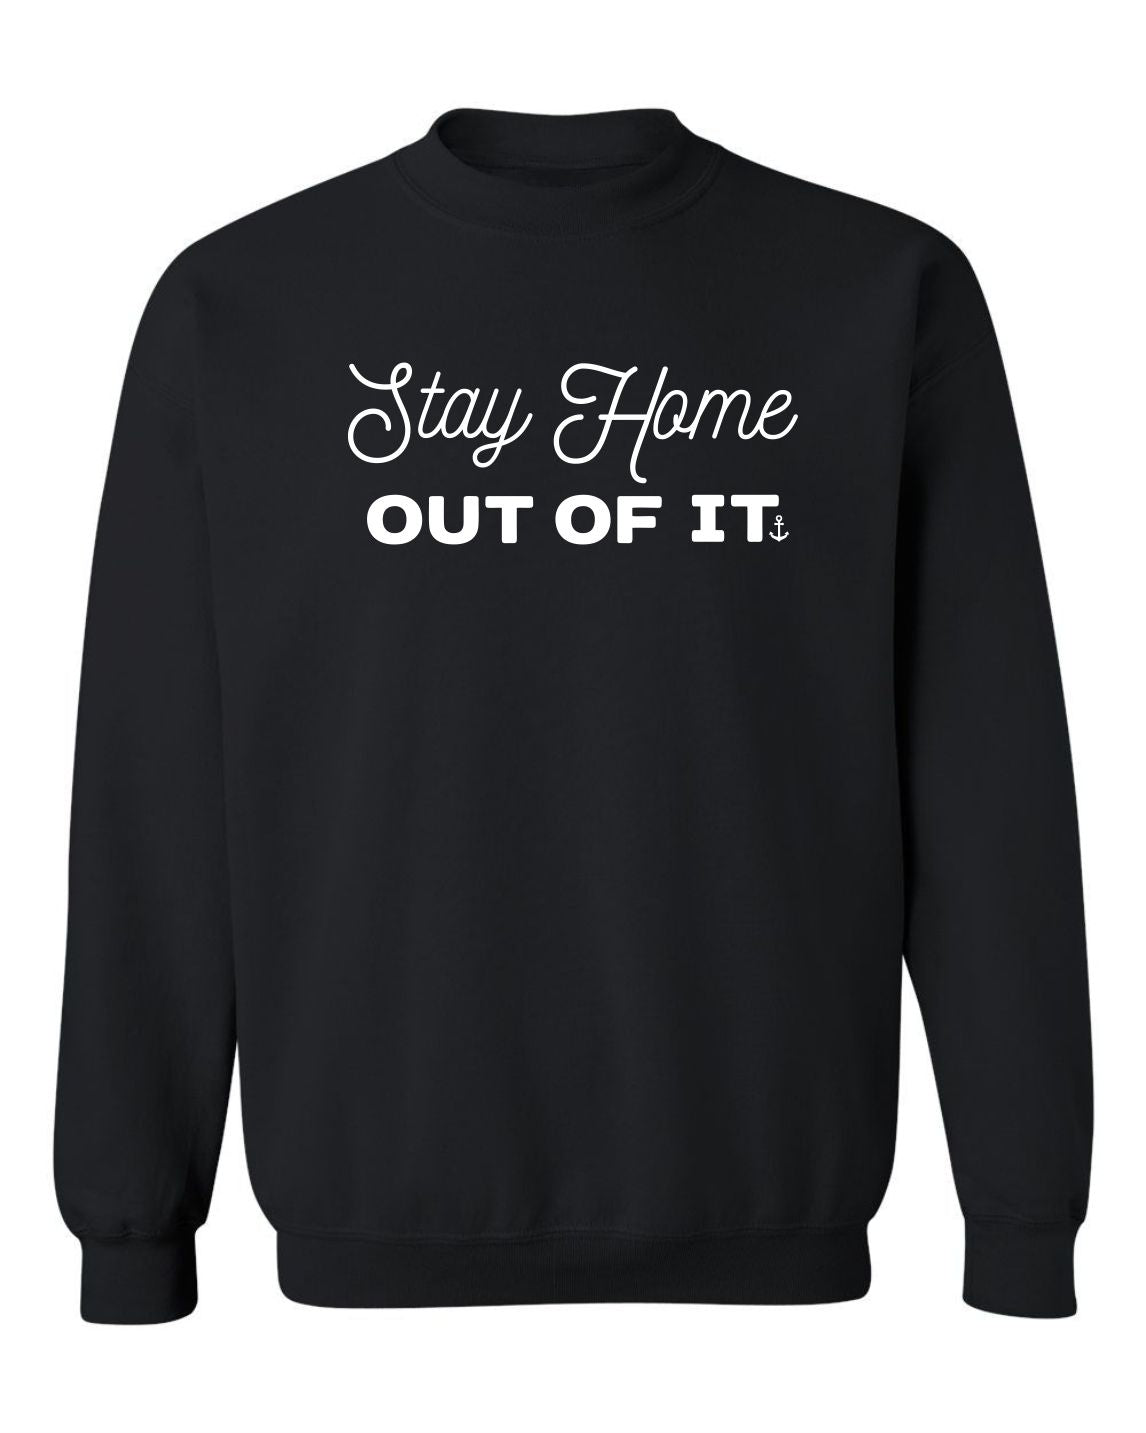 "Stay Home Out Of It" Unisex Crewneck Sweatshirt